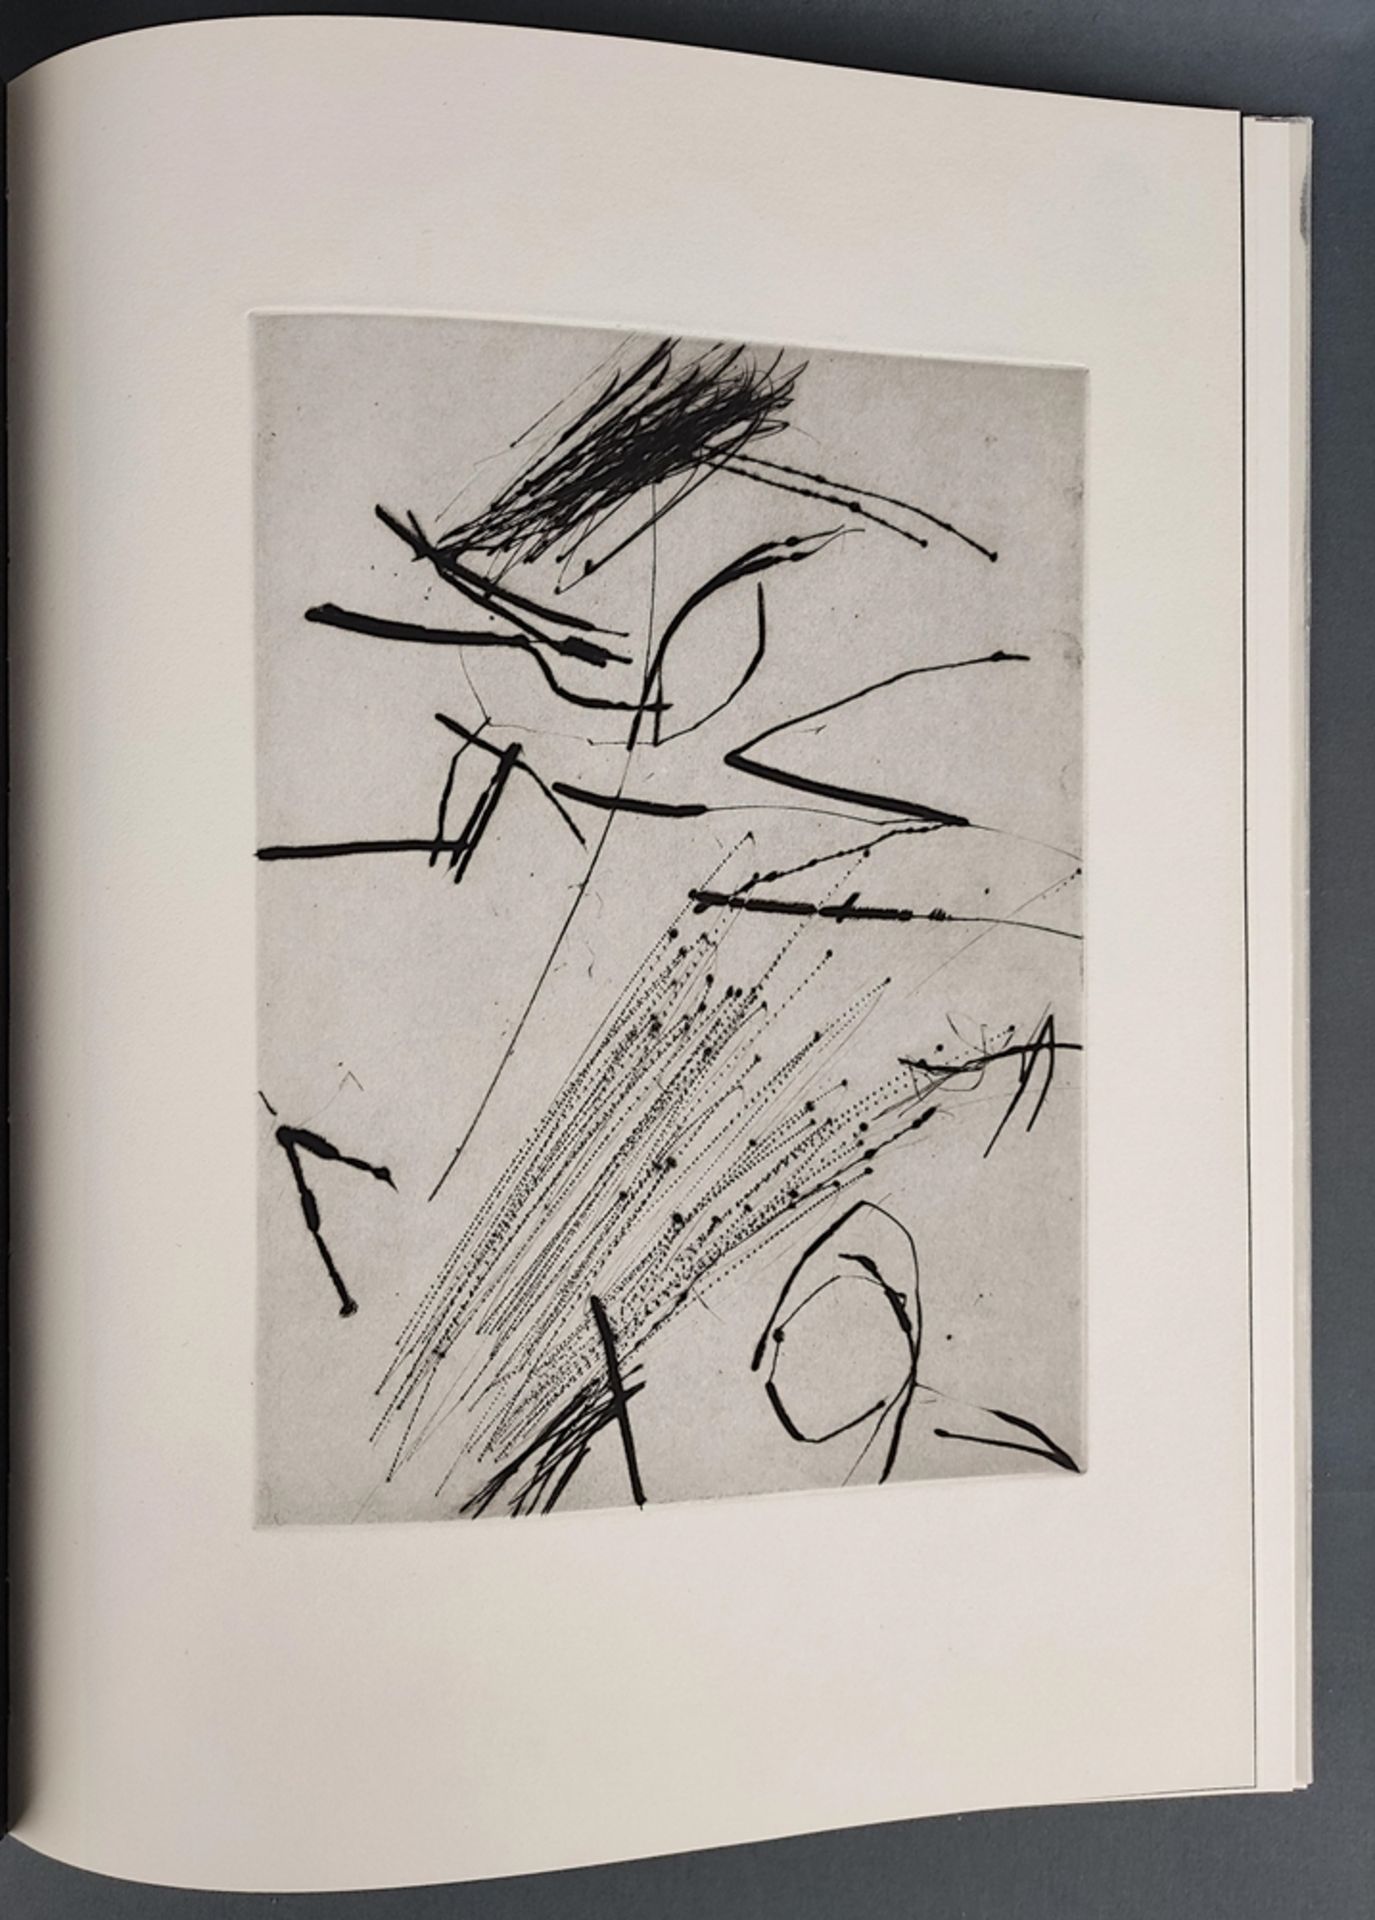 2 volumes "Krater und Wolke", consisting of no. 6 and no. 7, no. 6: Winkler, Ralf (A. R. Penck), ed - Image 10 of 12